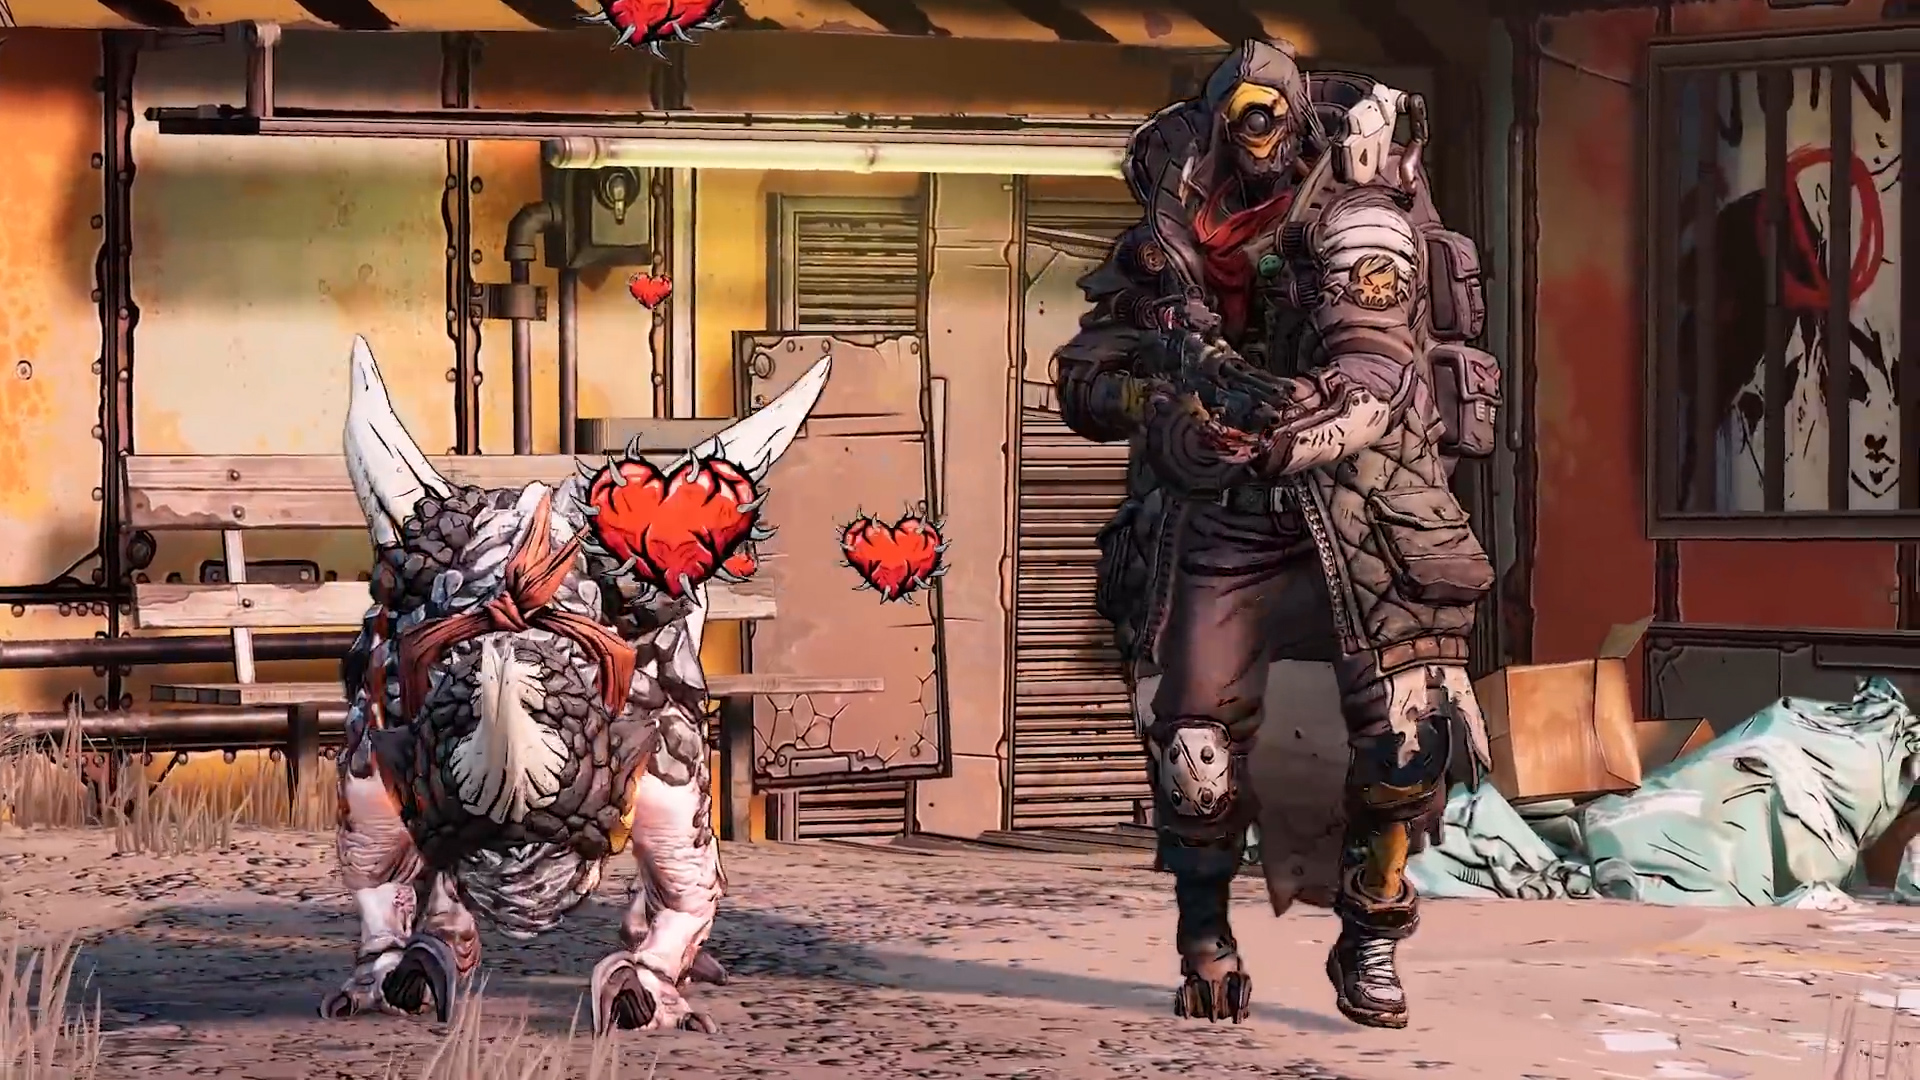 Borderlands 3 builds how to respec and the best build for FL4K, Amara